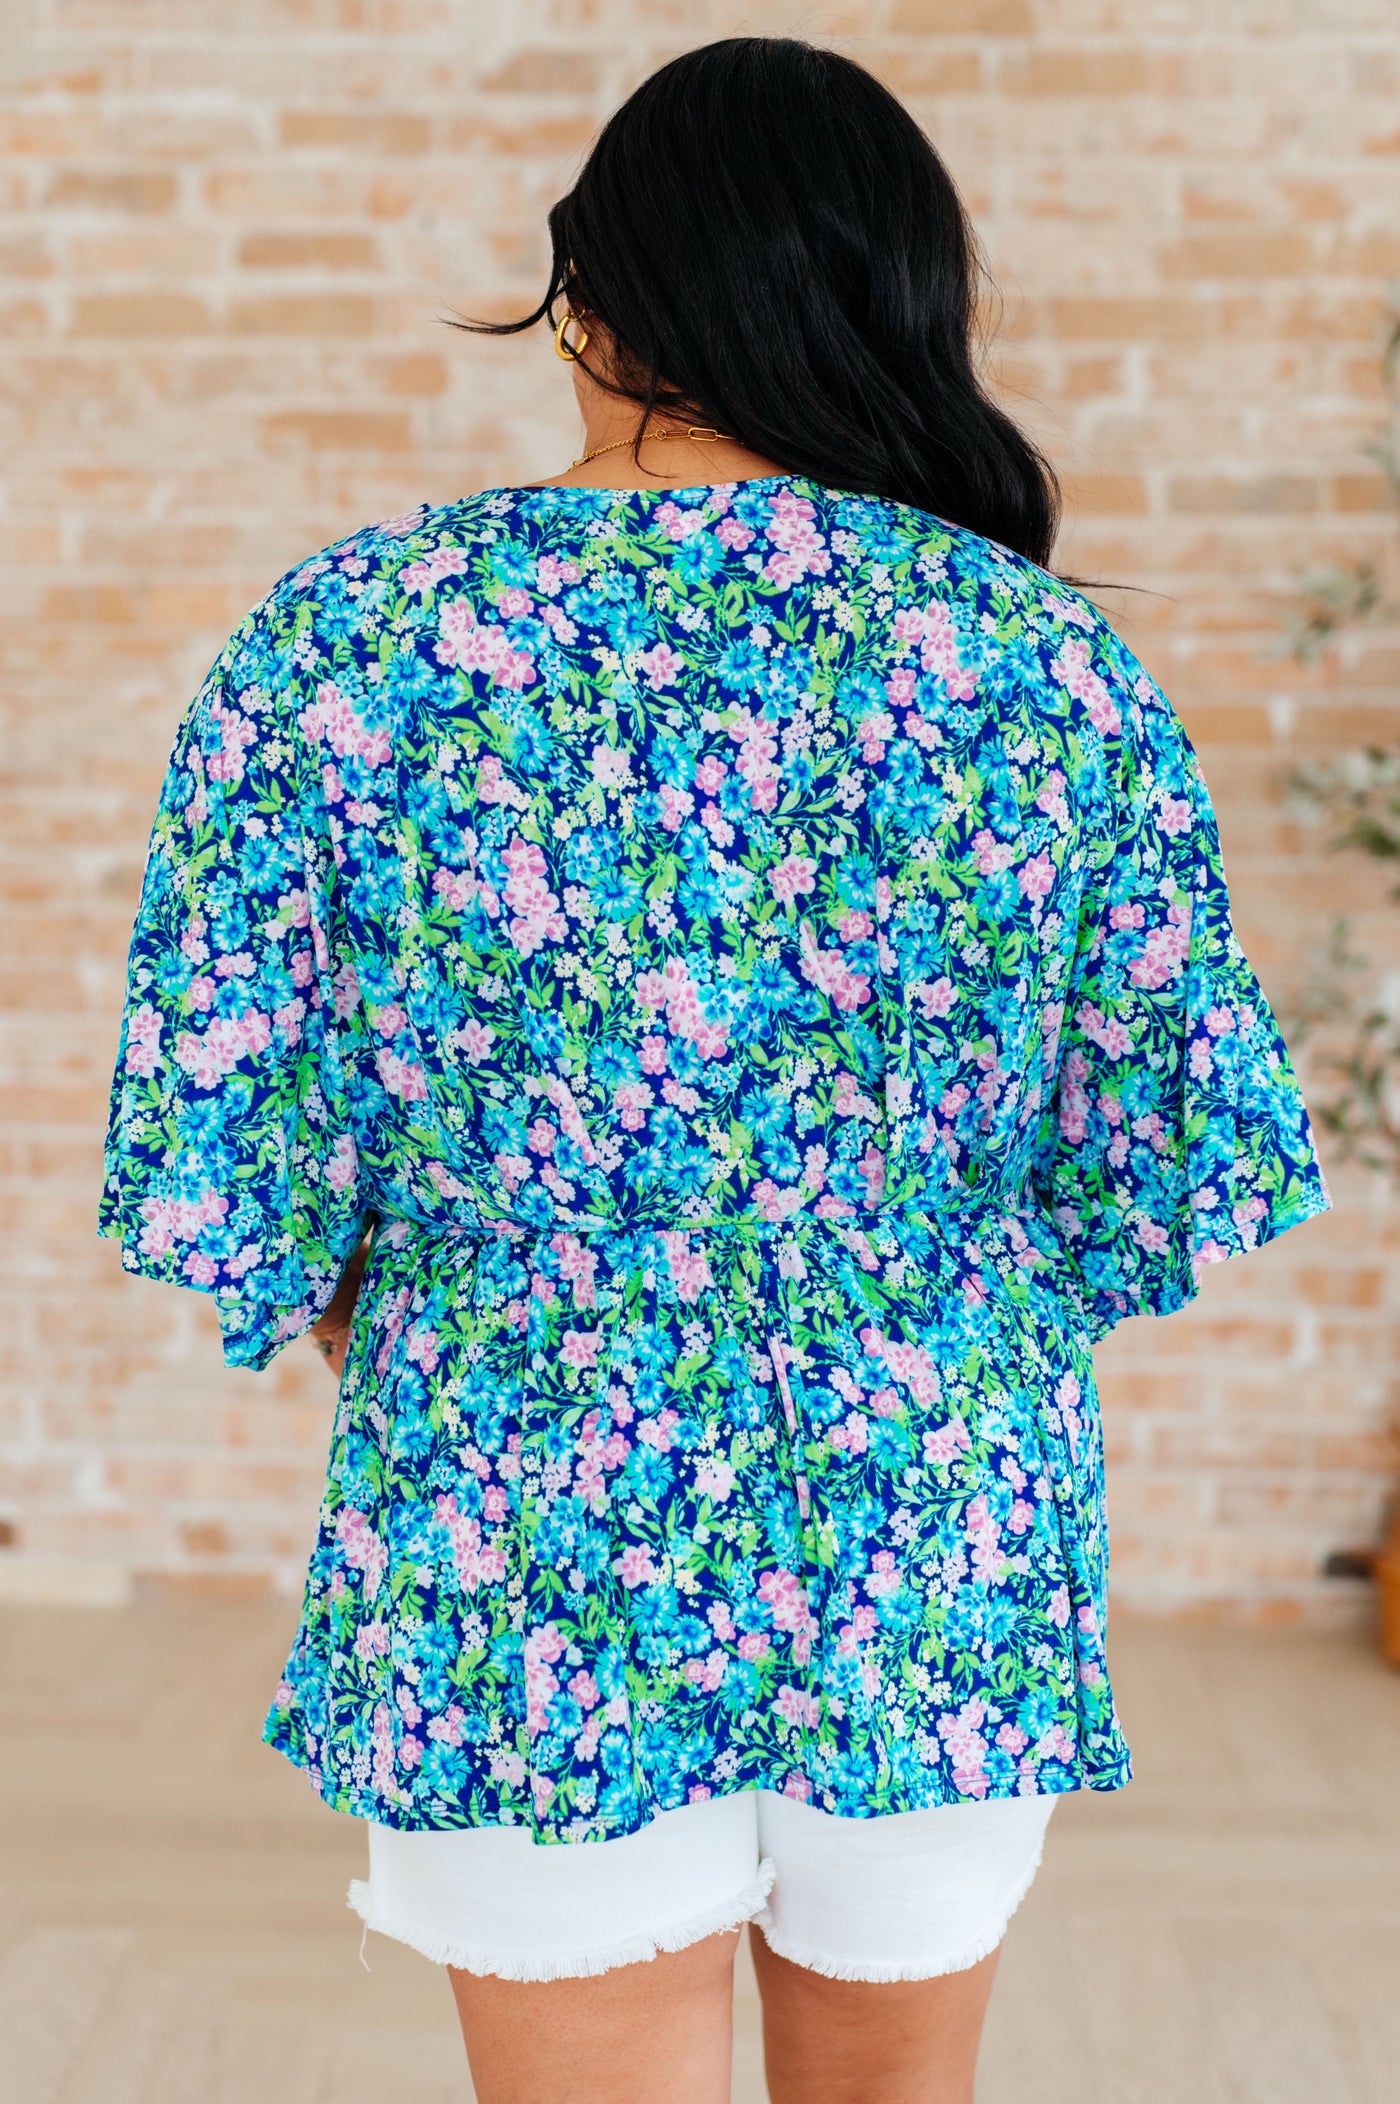 Dreamer Peplum Top in Navy and Mint Floral Southern Soul Collectives